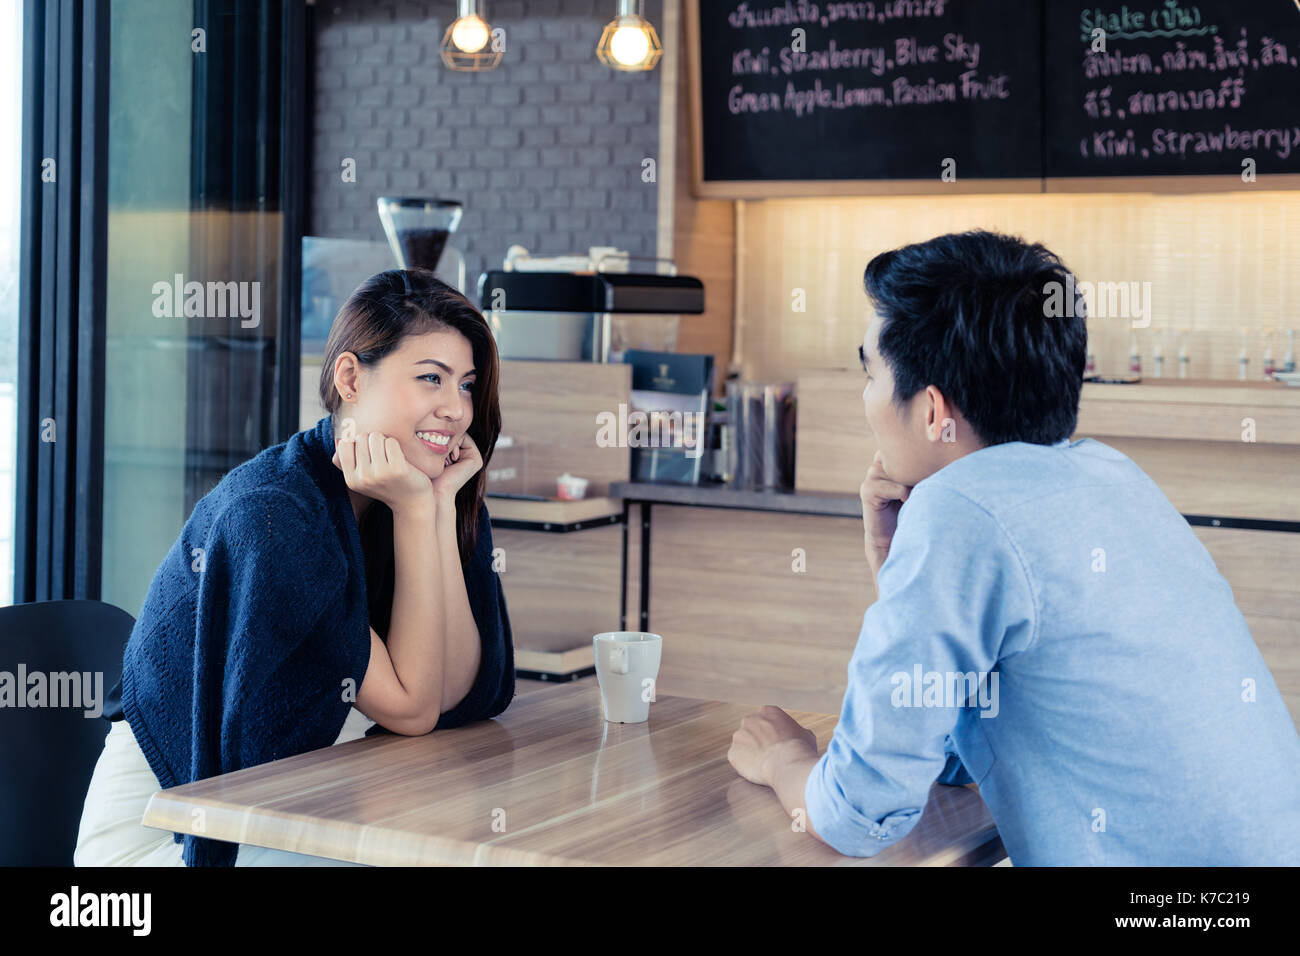 Dating in a cafe. Beautiful Asian lover couple sitting in a cafe enjoying in coffee and conversation. Love and romance. Stock Photo